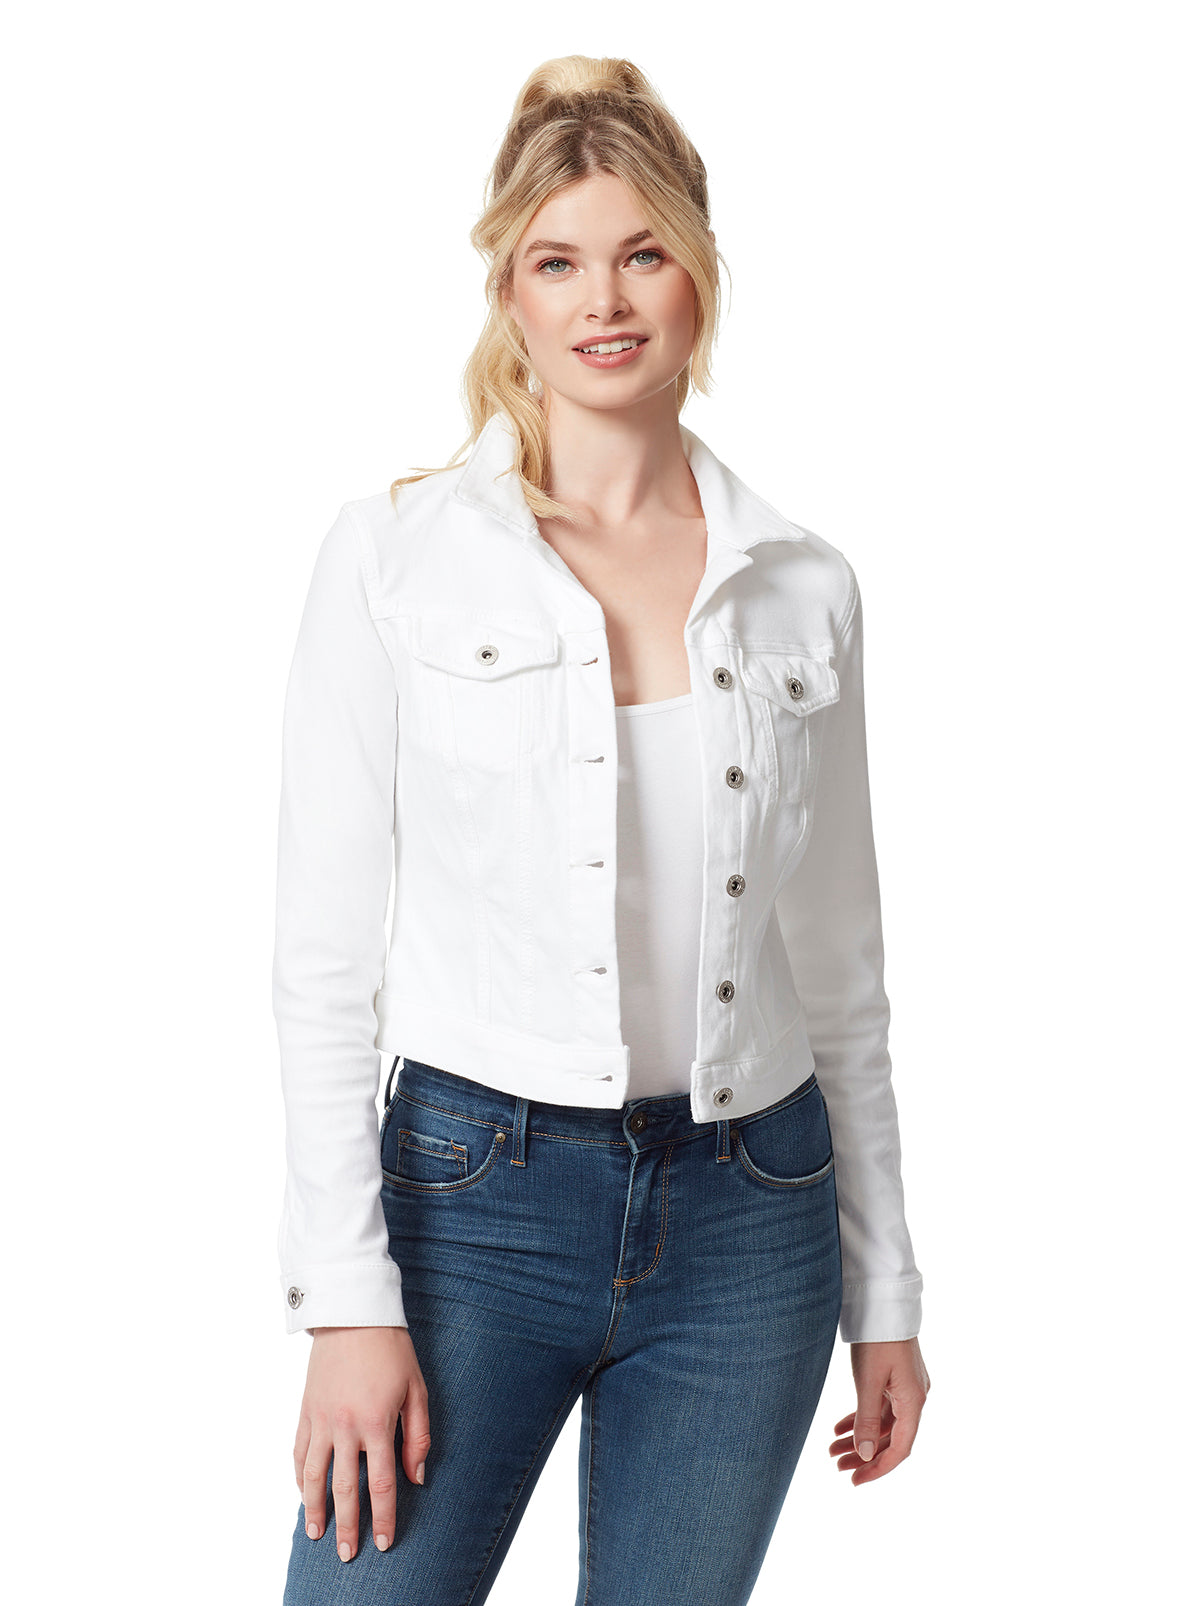 White Solid Casual Full Sleeves Regular Collar Women Slim Fit Jacket -  Selling Fast at Pantaloons.com